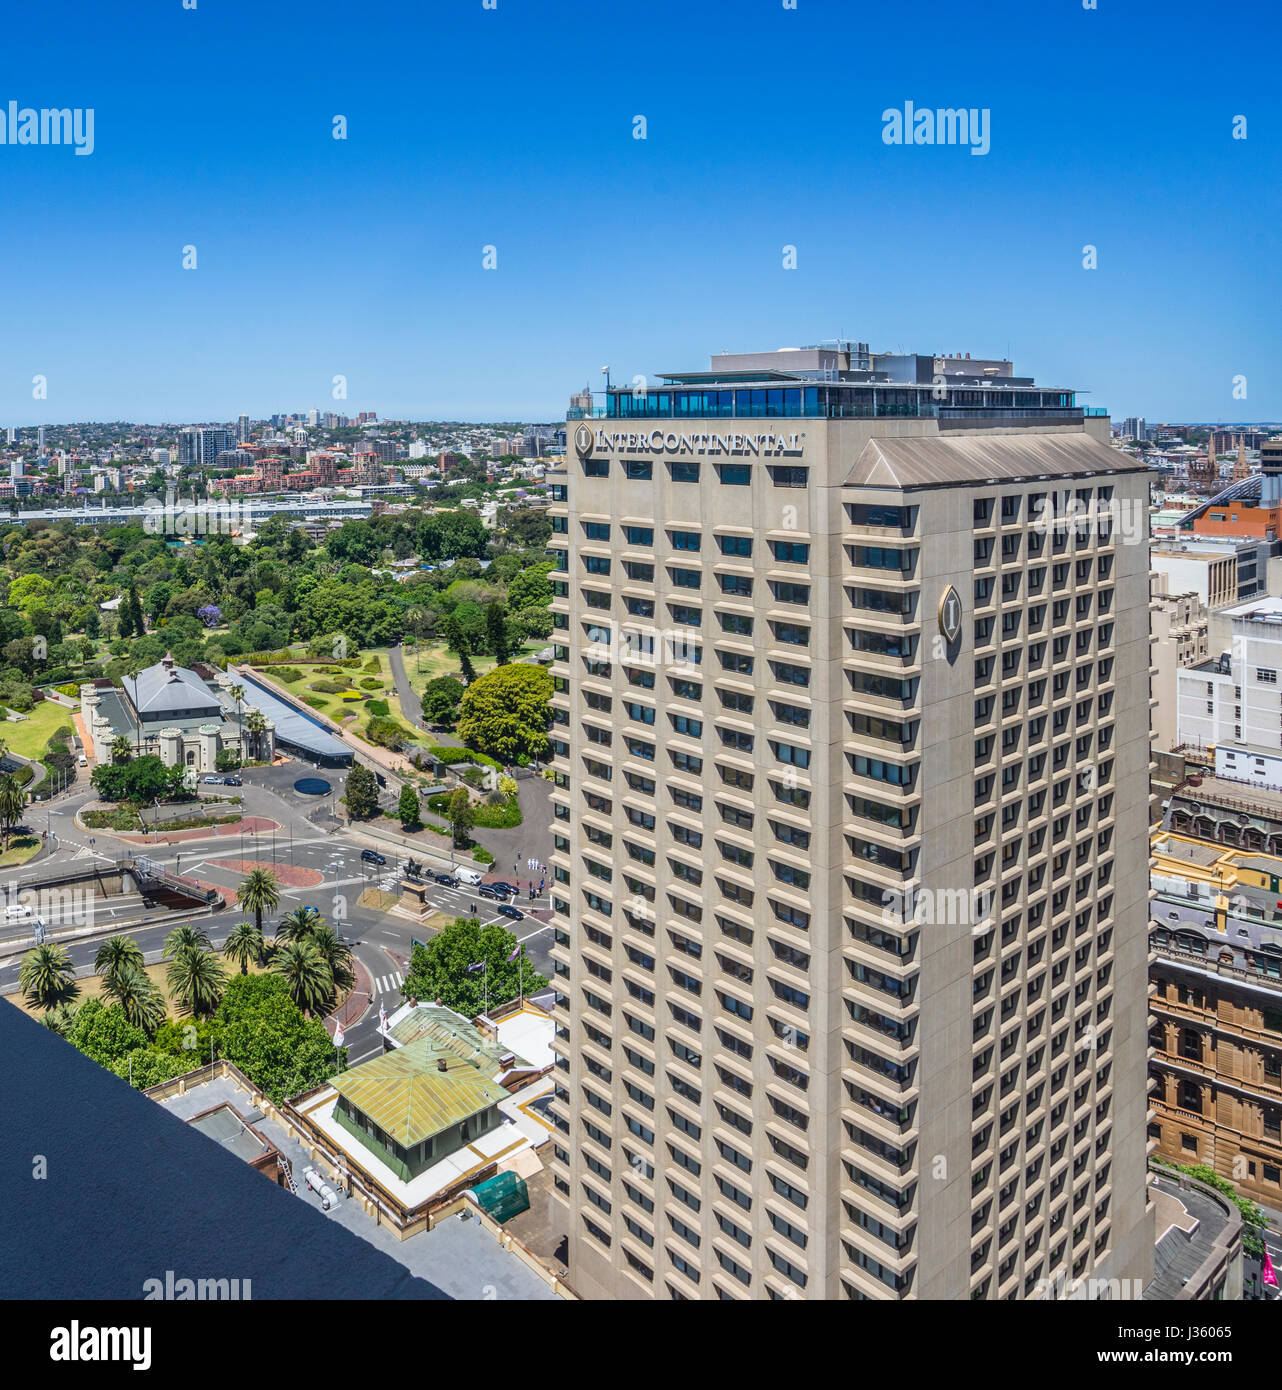 Australia, New South Wales, Sydney, view of the Hotel Inter-Continental Sydney against the backdrop of the Sydney Conversatorium of Music and the Roya Stock Photo